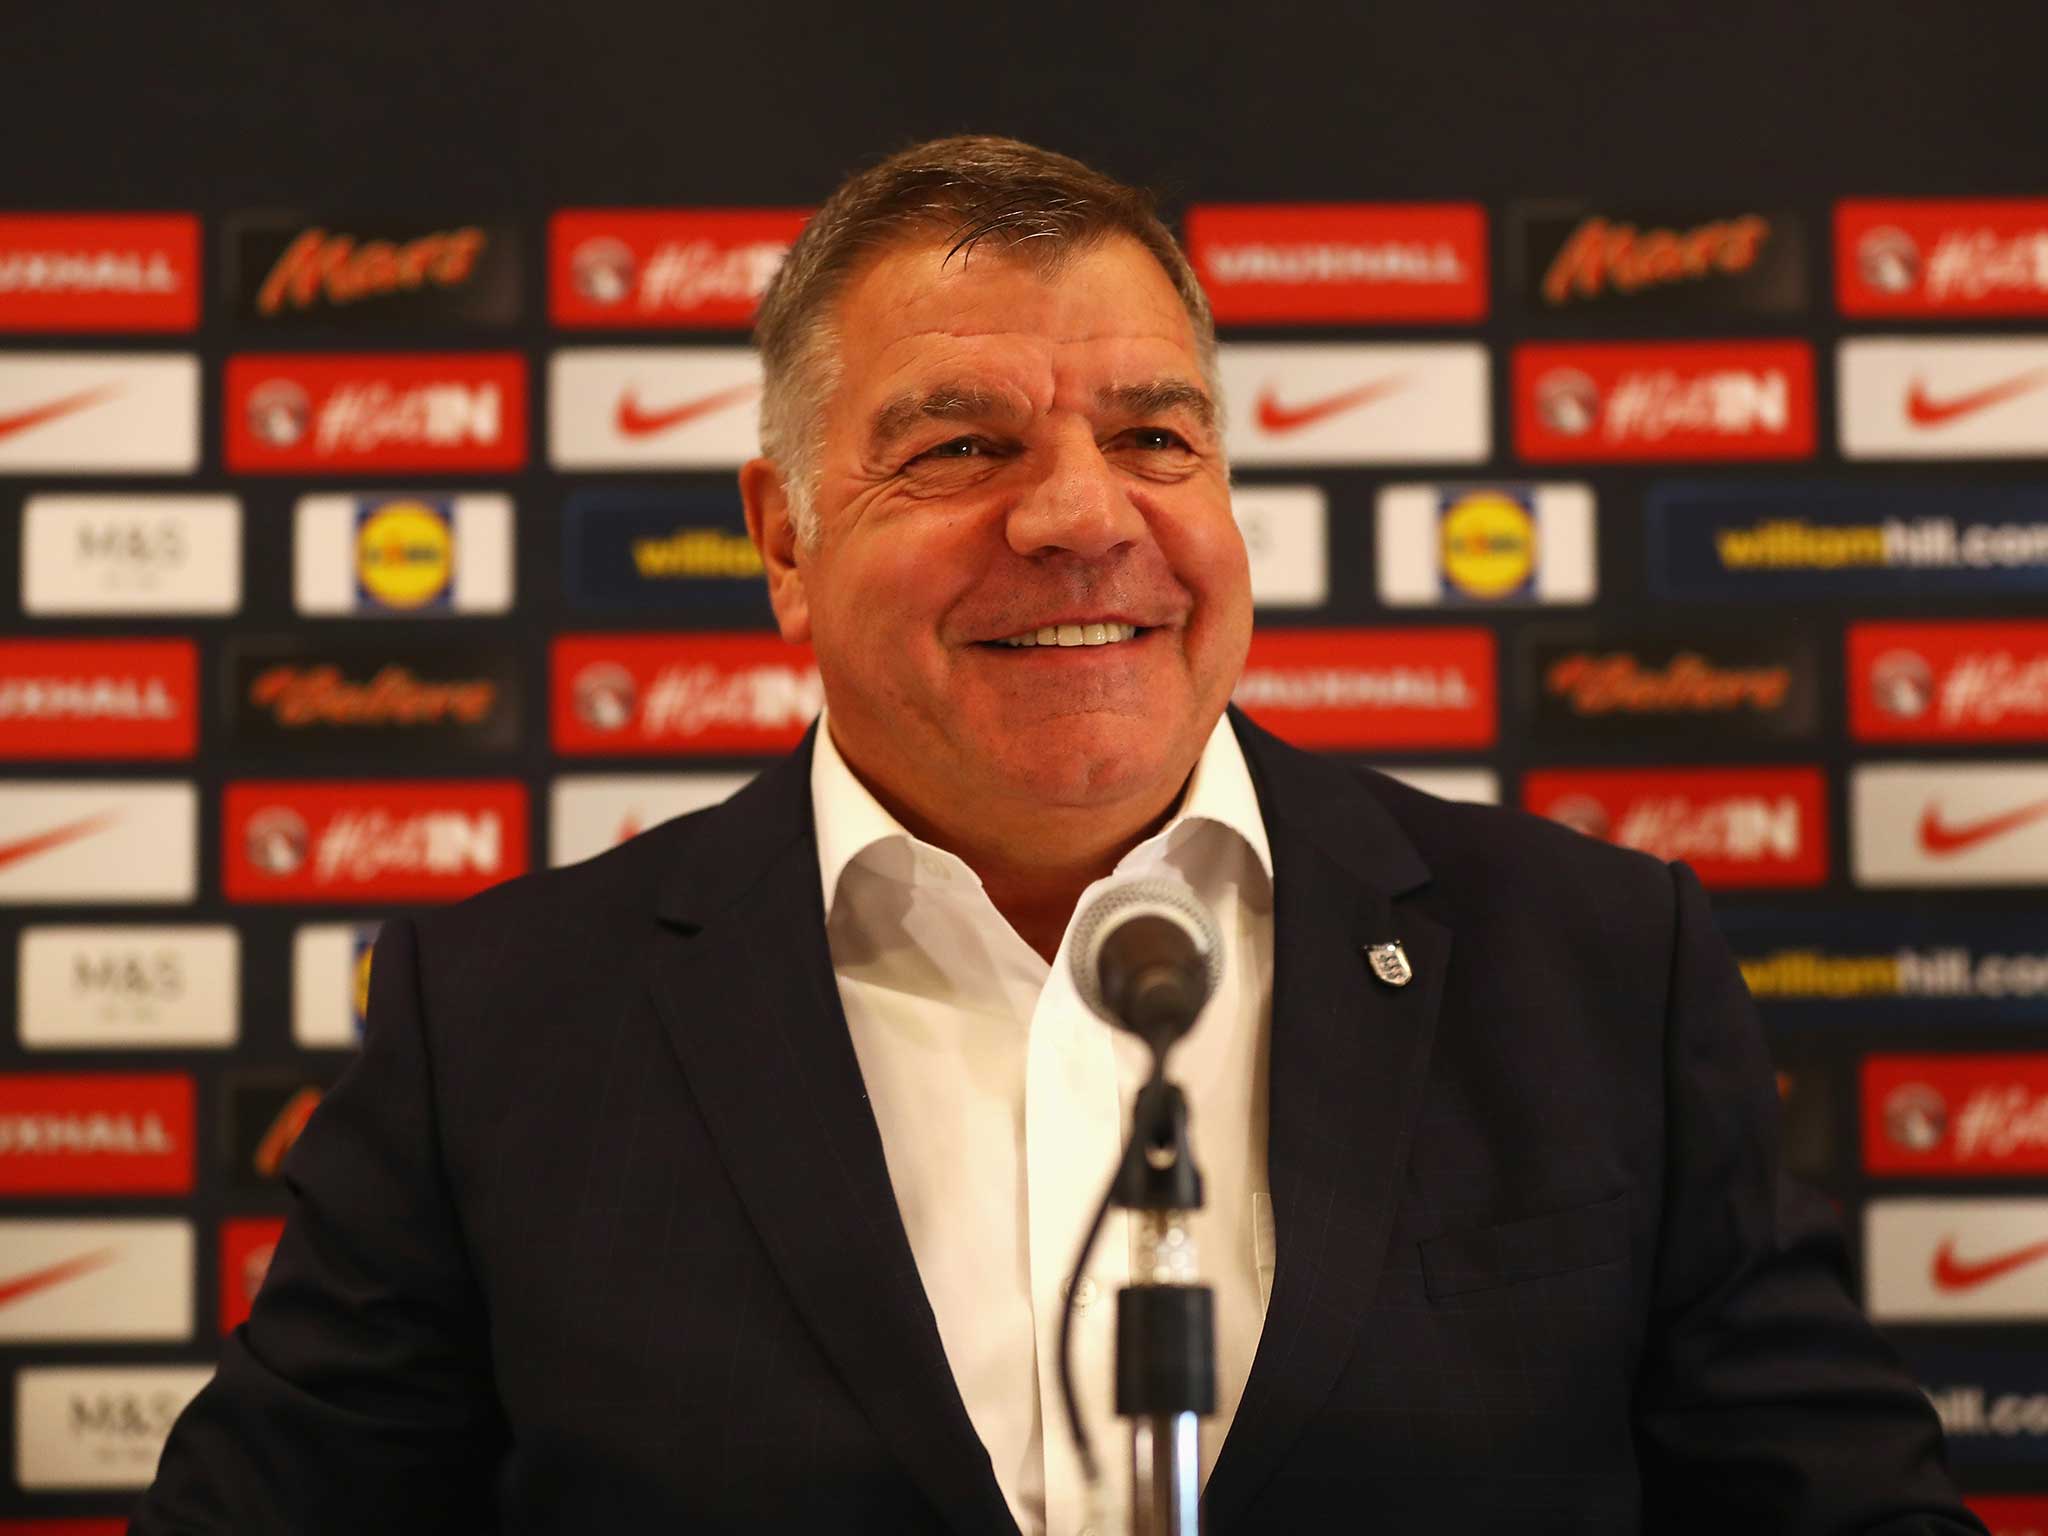 Sam Allardyce holds his first press conference as England manager